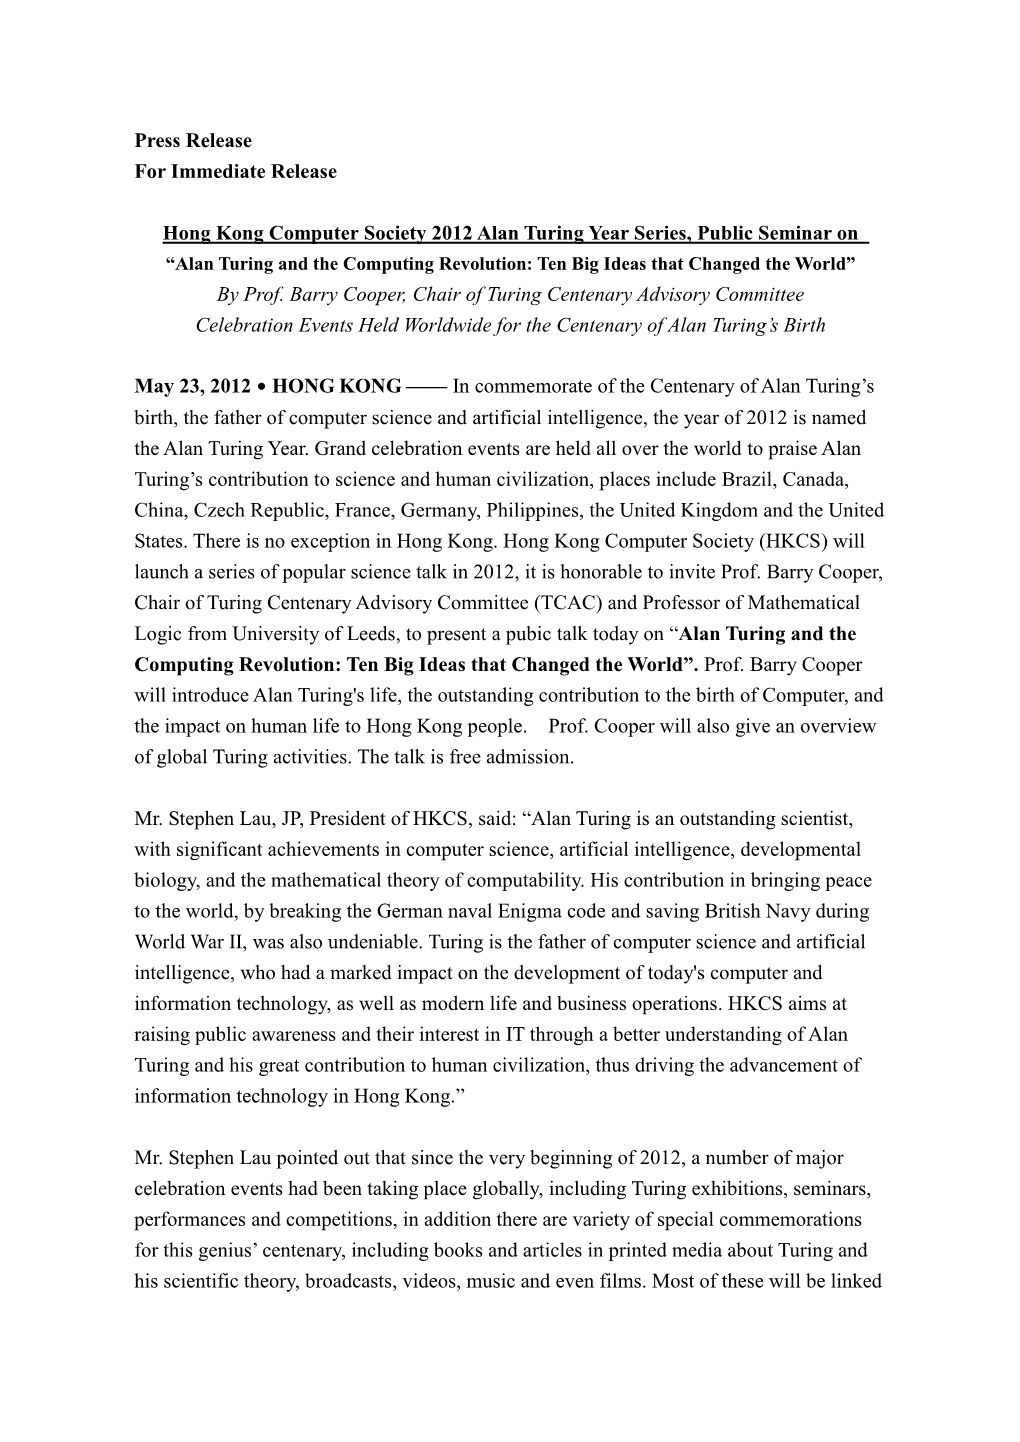 Press Release for Immediate Release Hong Kong Computer